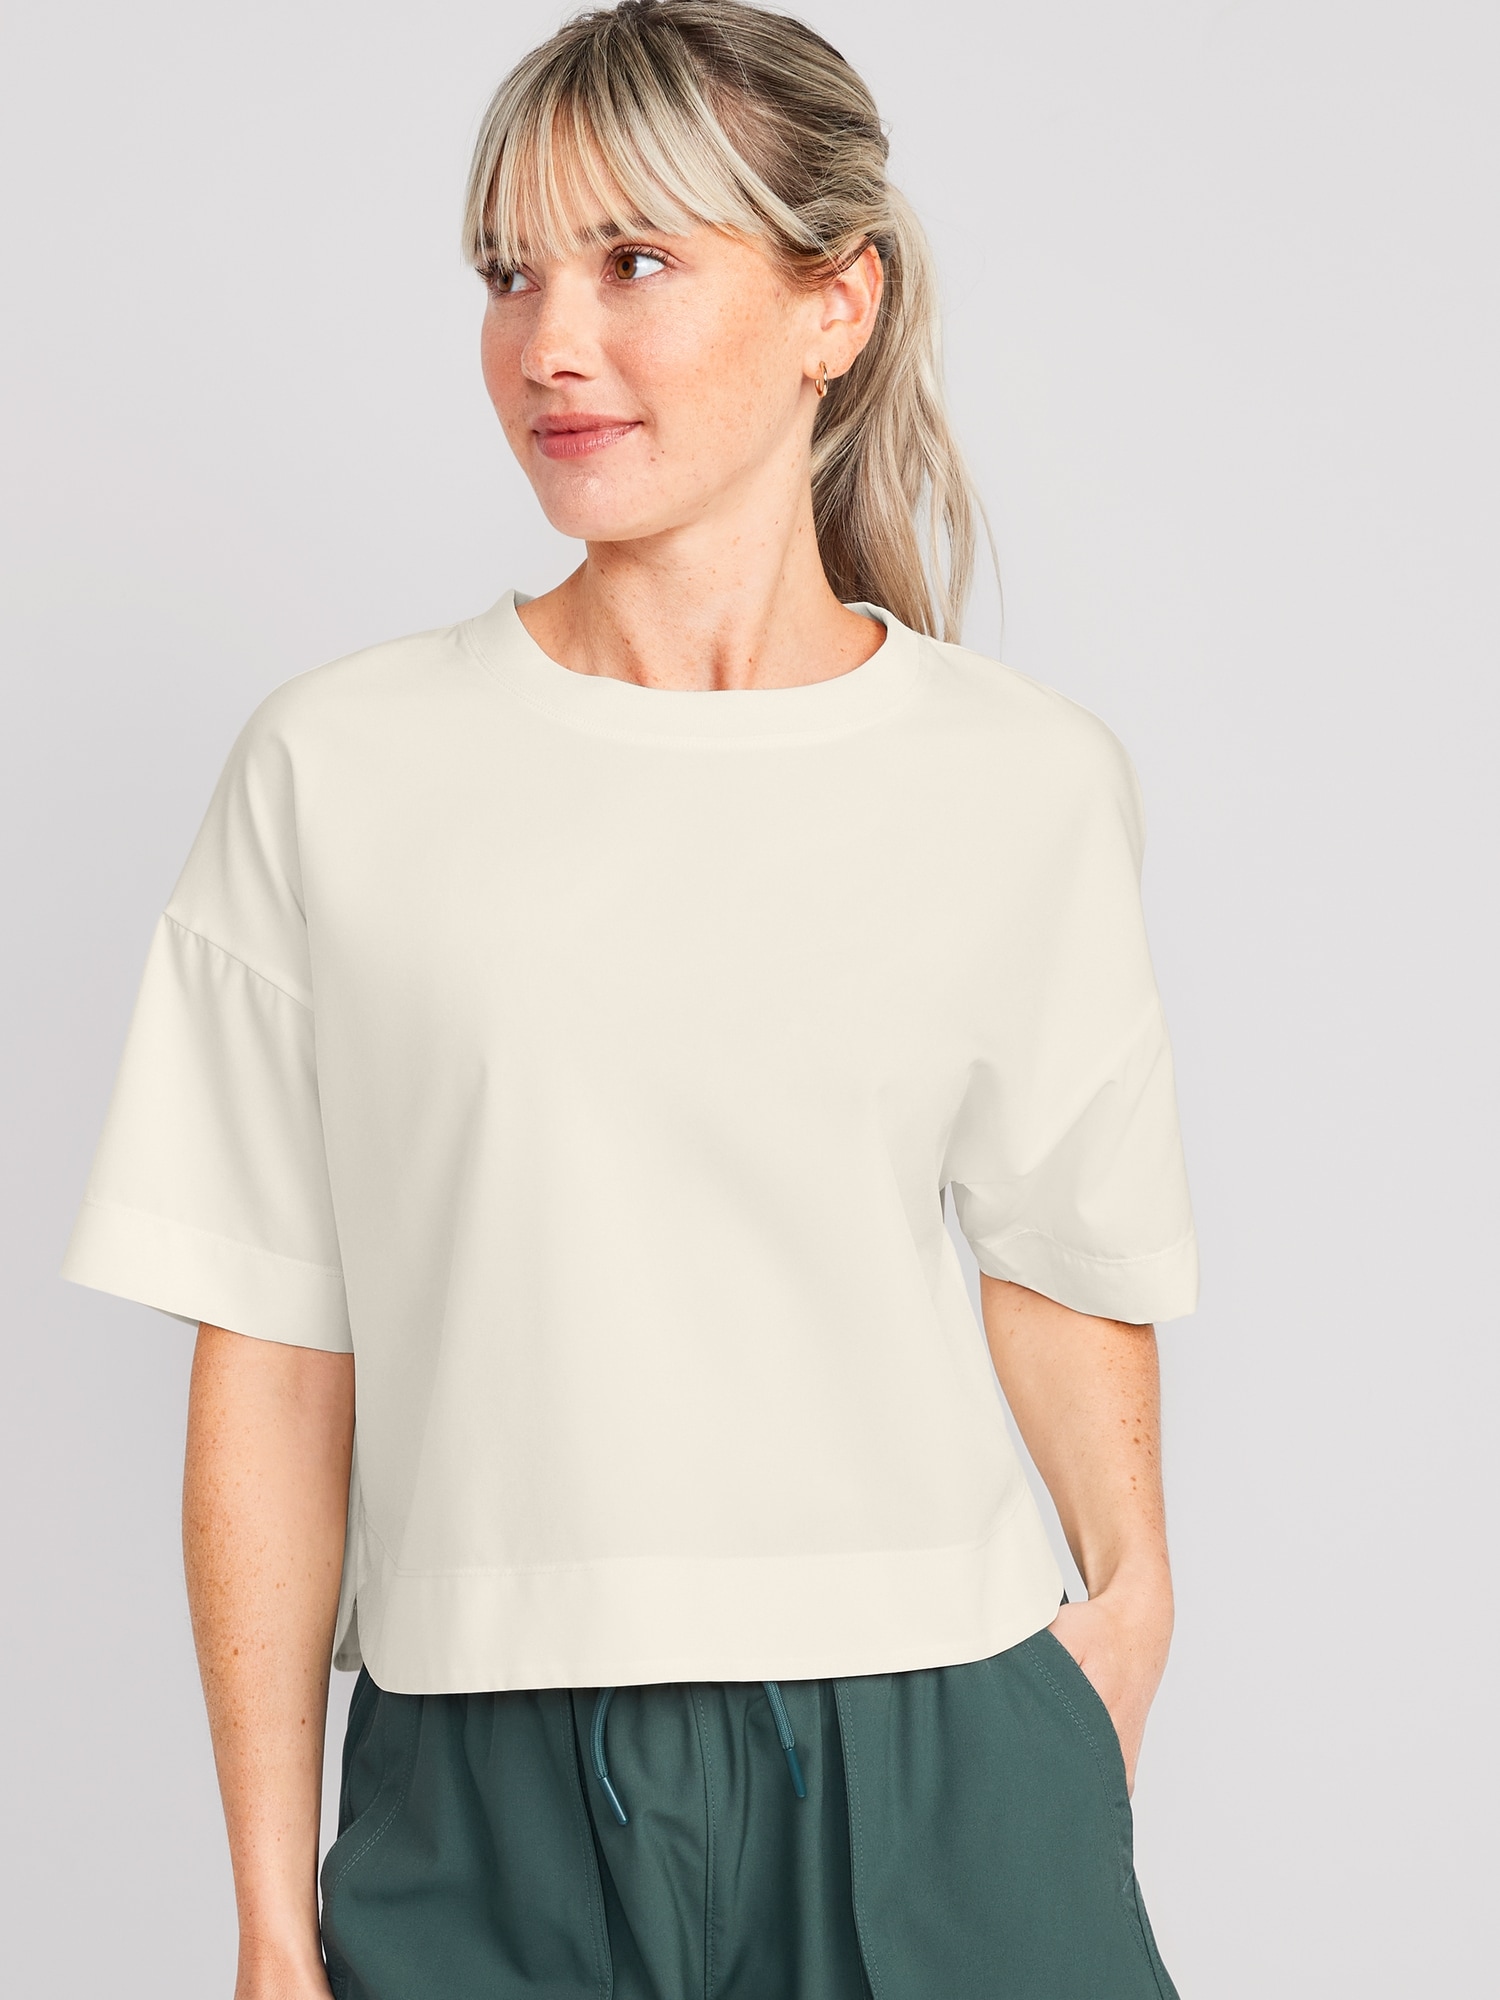 Old Navy StretchTech Cropped T-Shirt for Women beige. 1